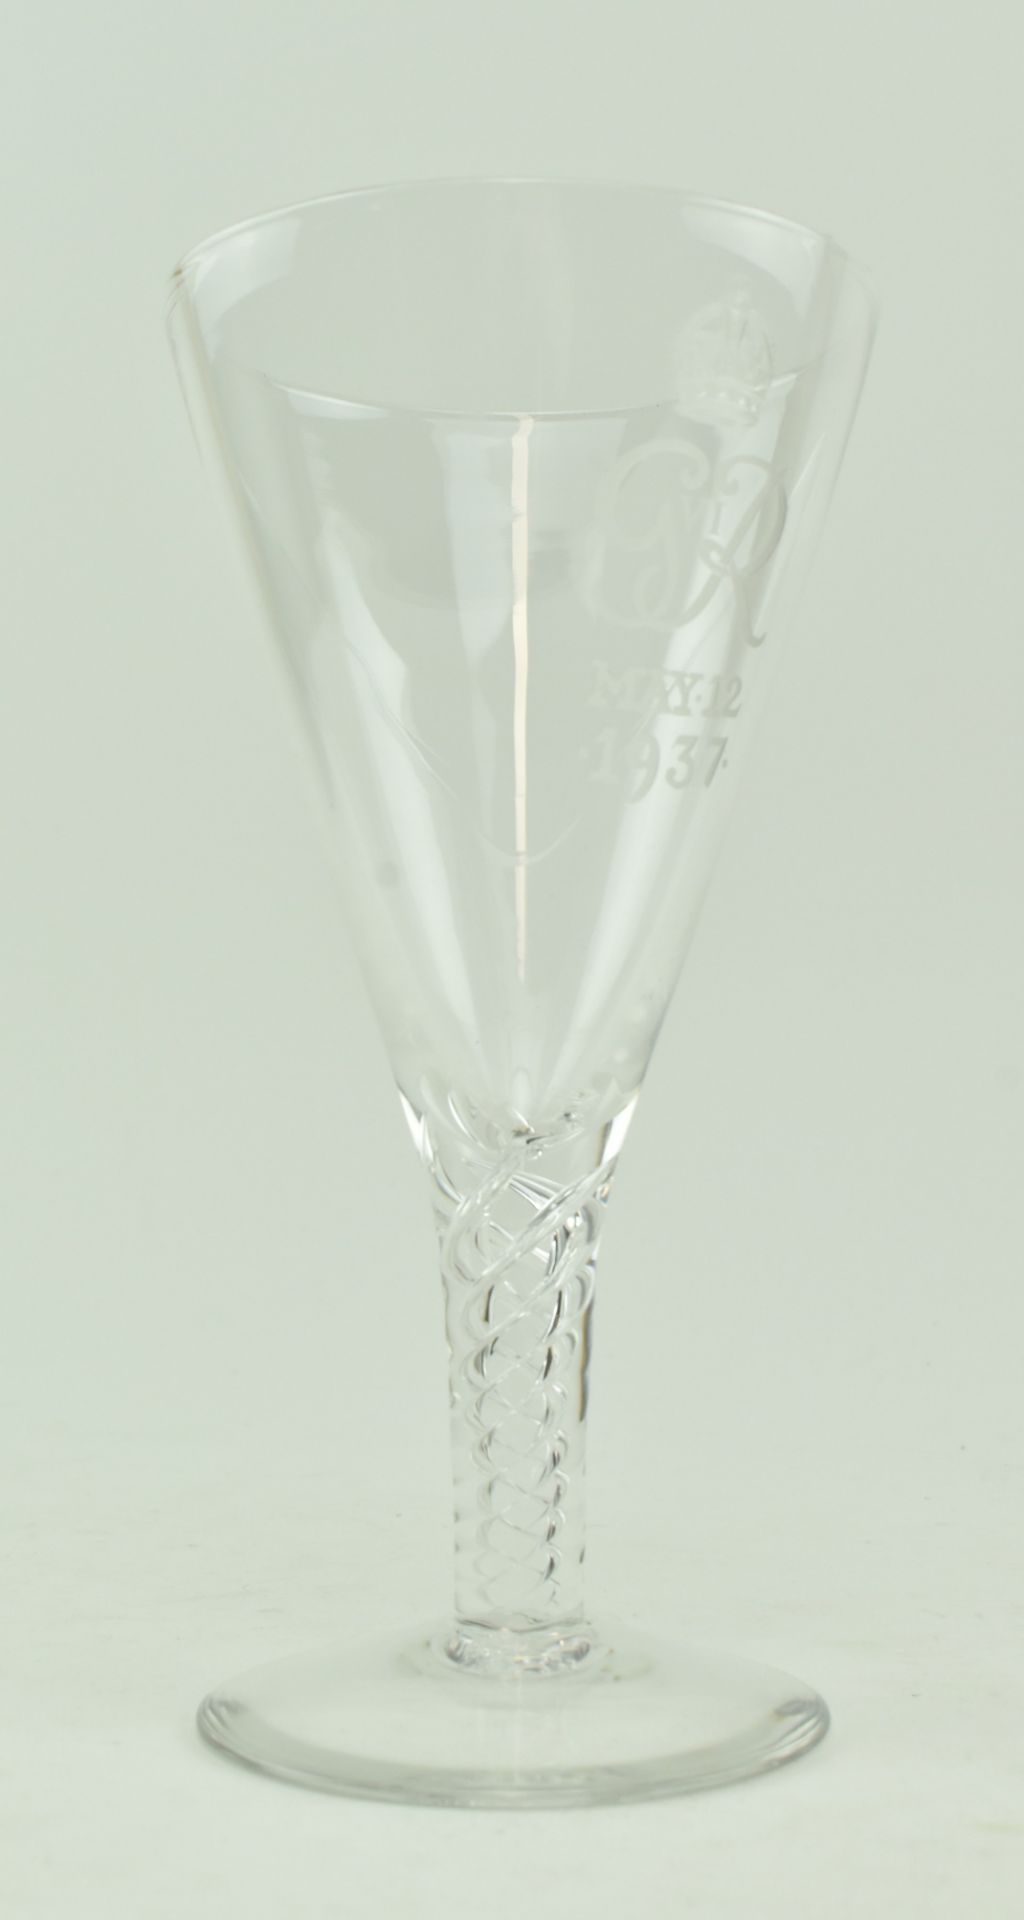 STUART GLASS - 1937 COMMEMORATIVE ETCHED GLASS CHALICE - Image 7 of 7